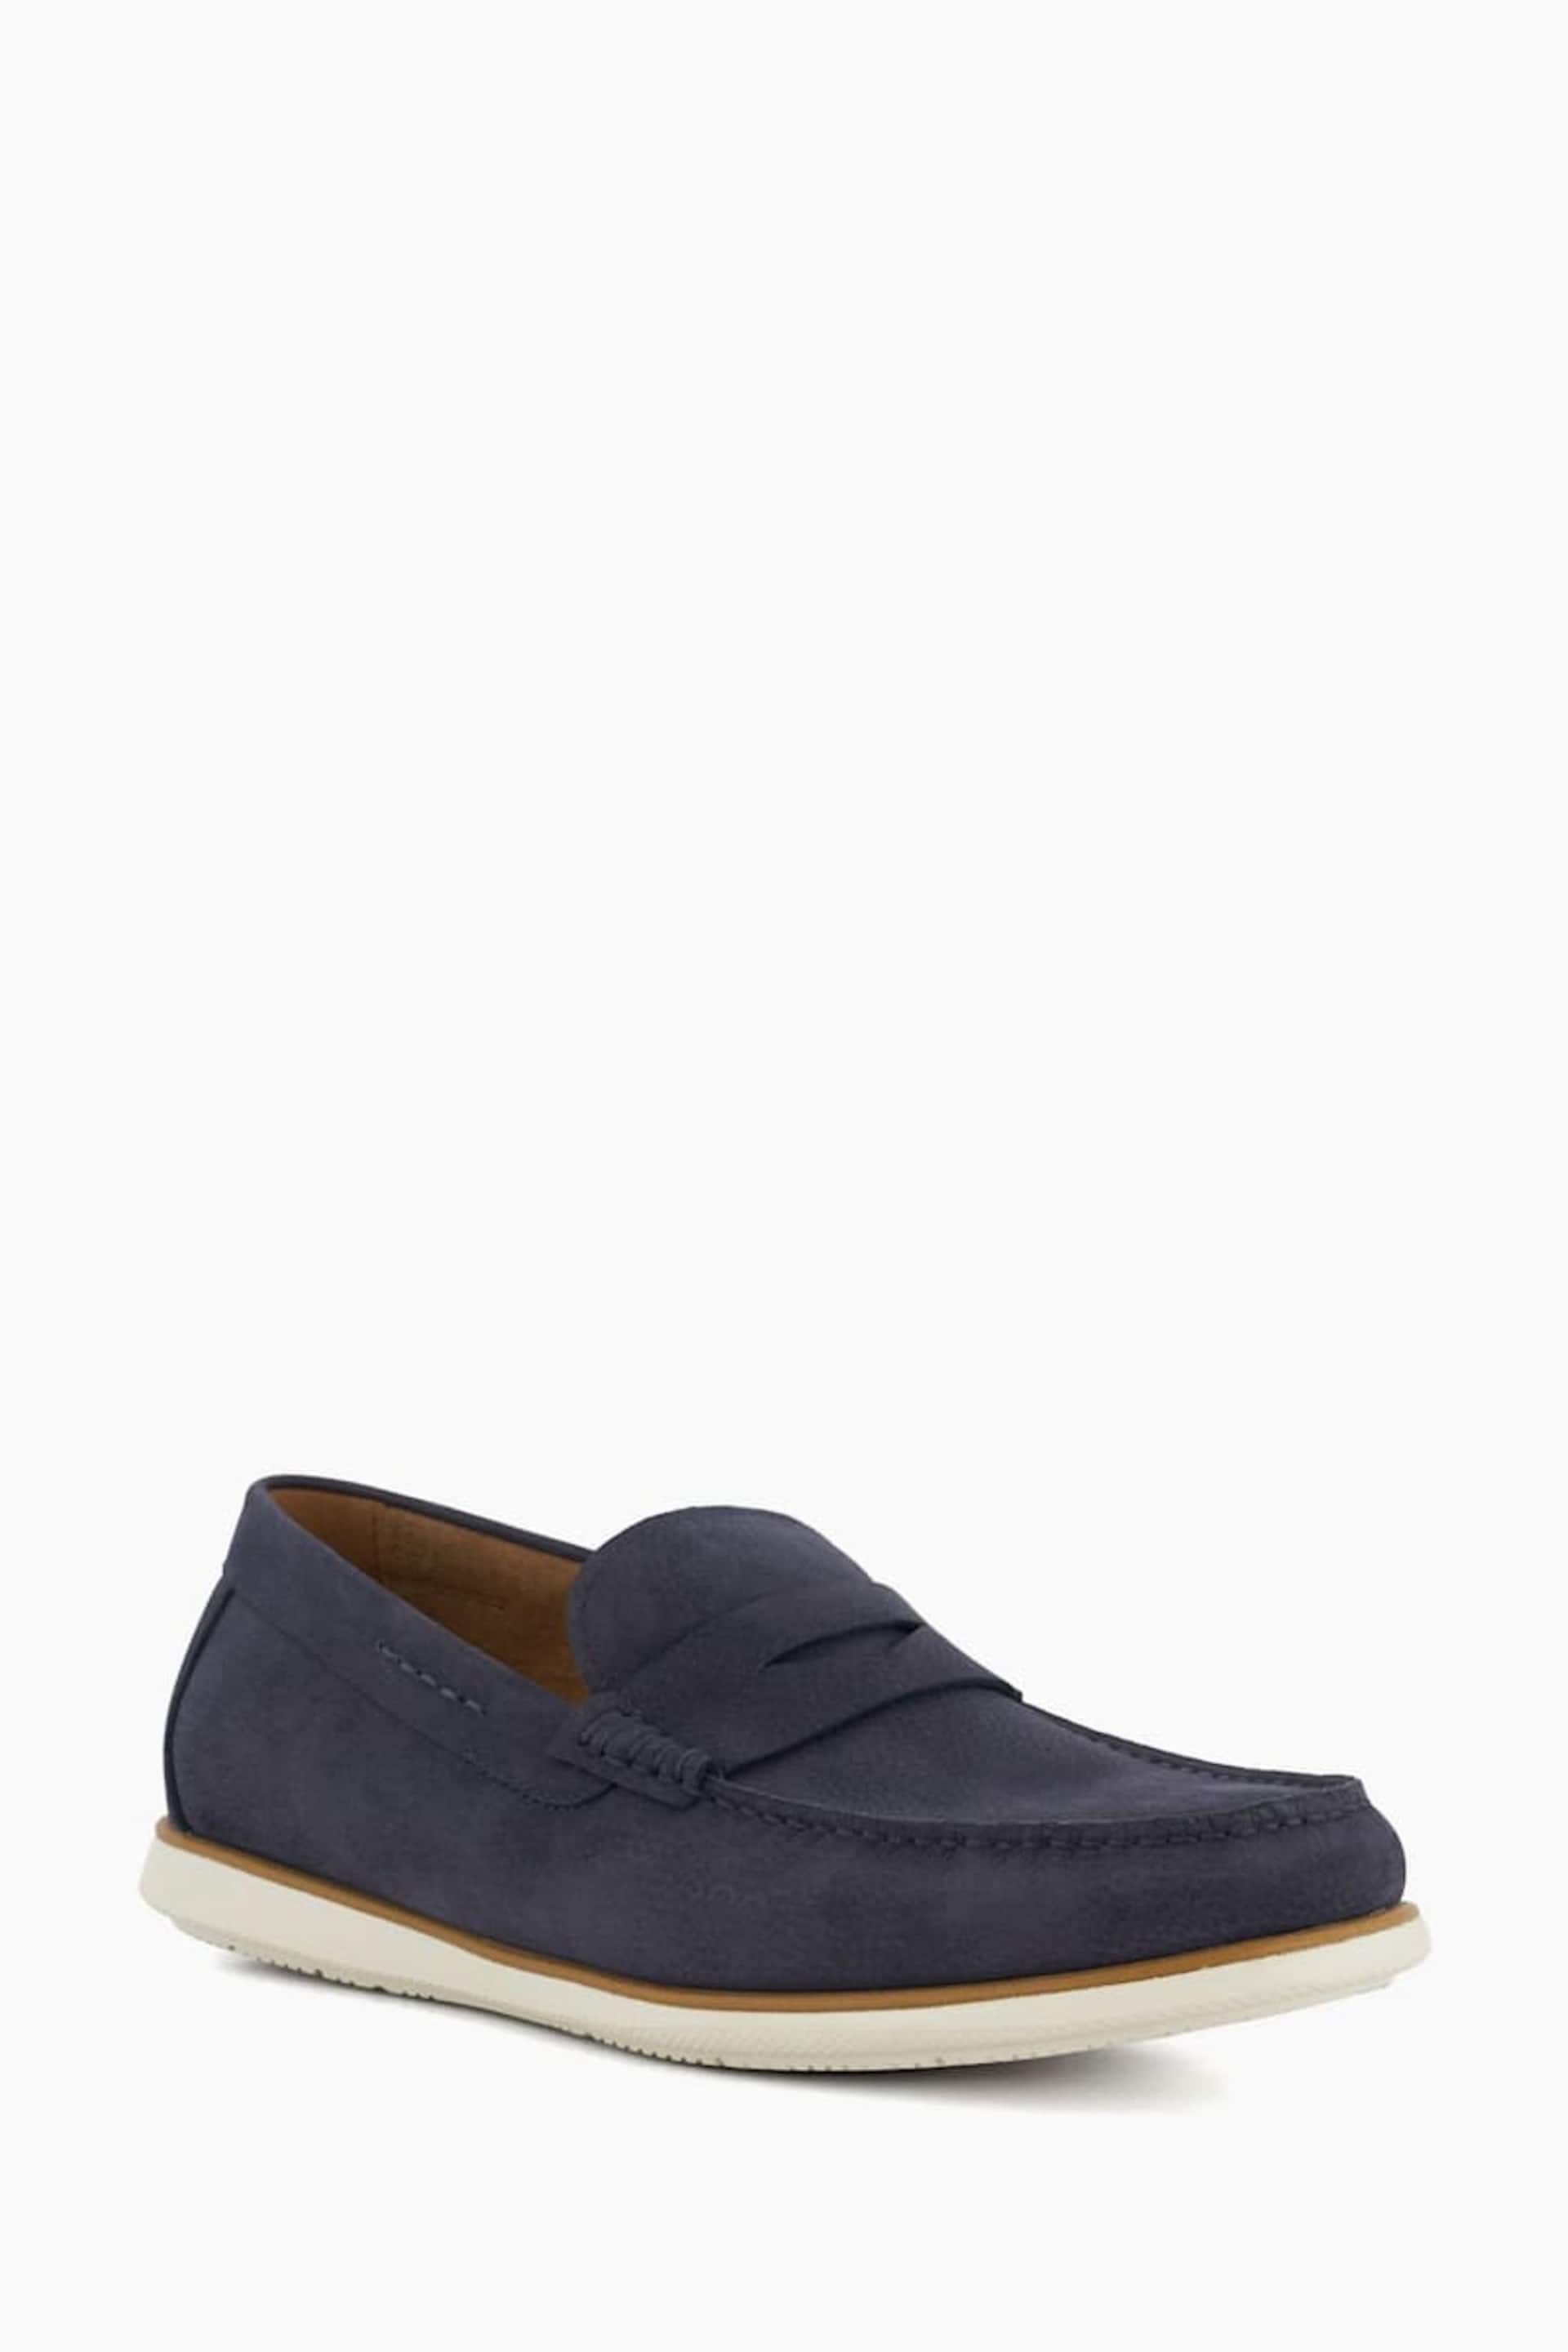 Dune London Blue Berkly Sole Loafers - Image 4 of 6